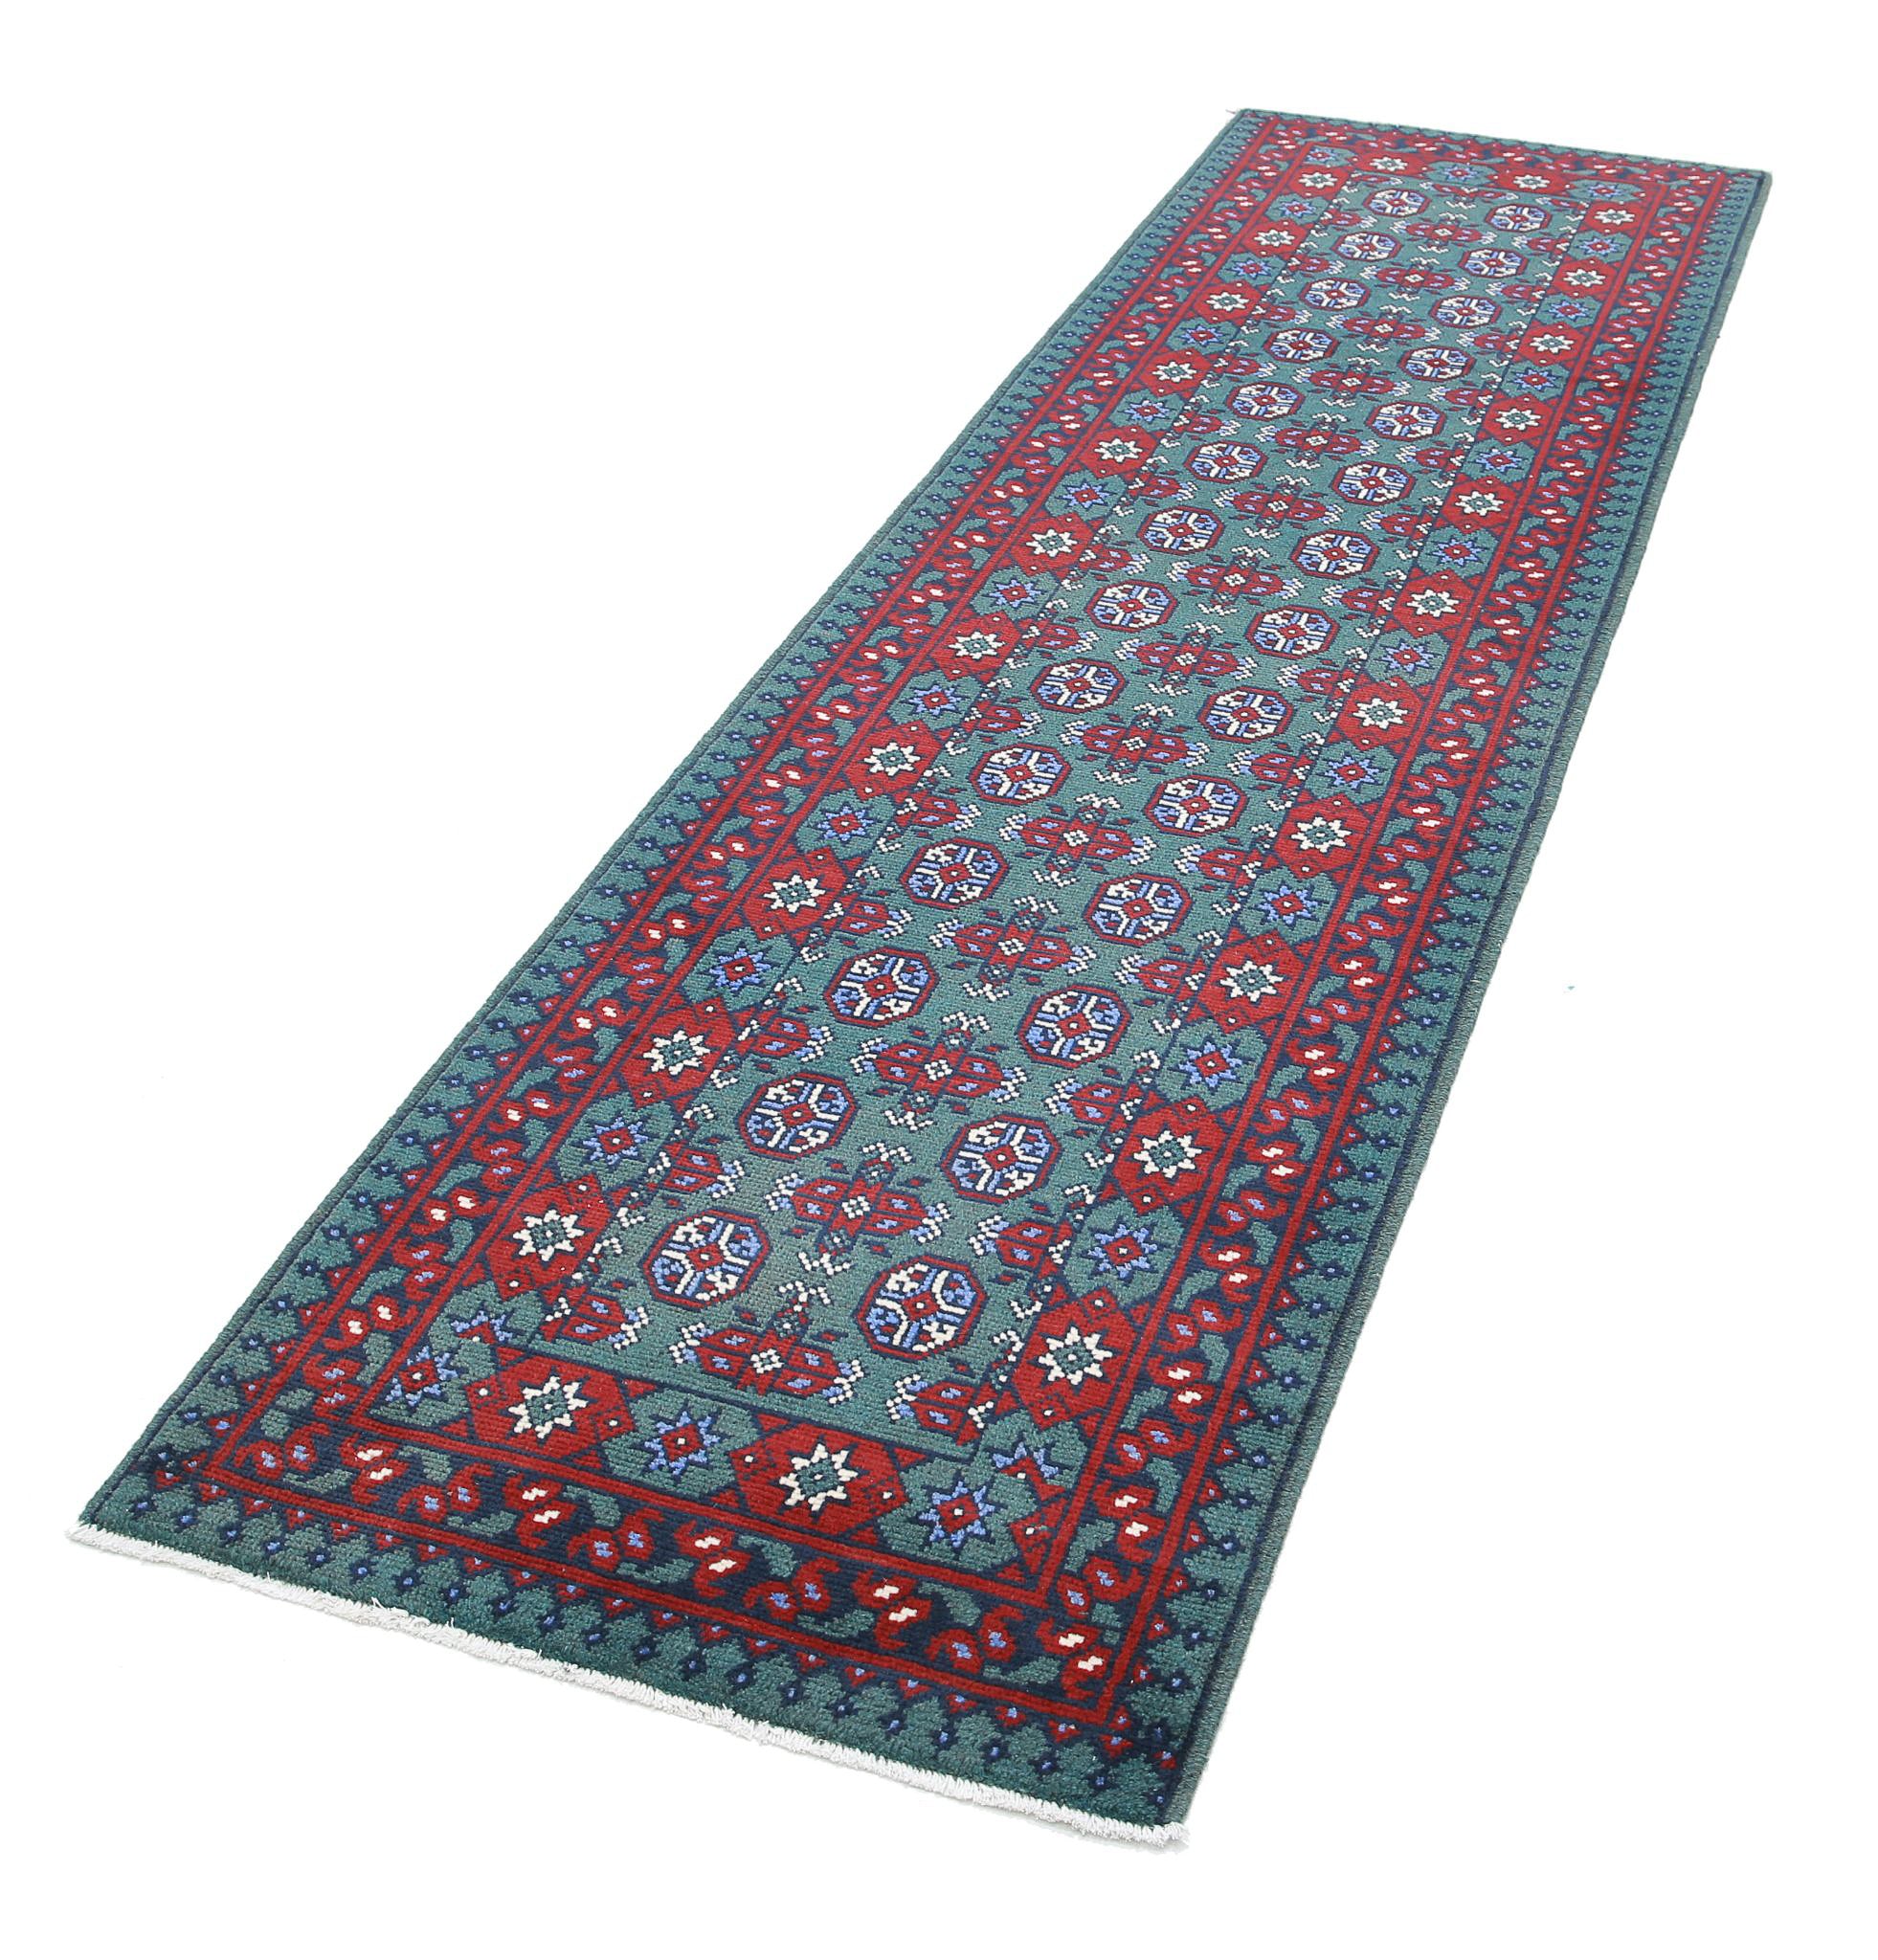 Revival-hand-knotted-gul-collection-wool-rug-5013992-2.jpg